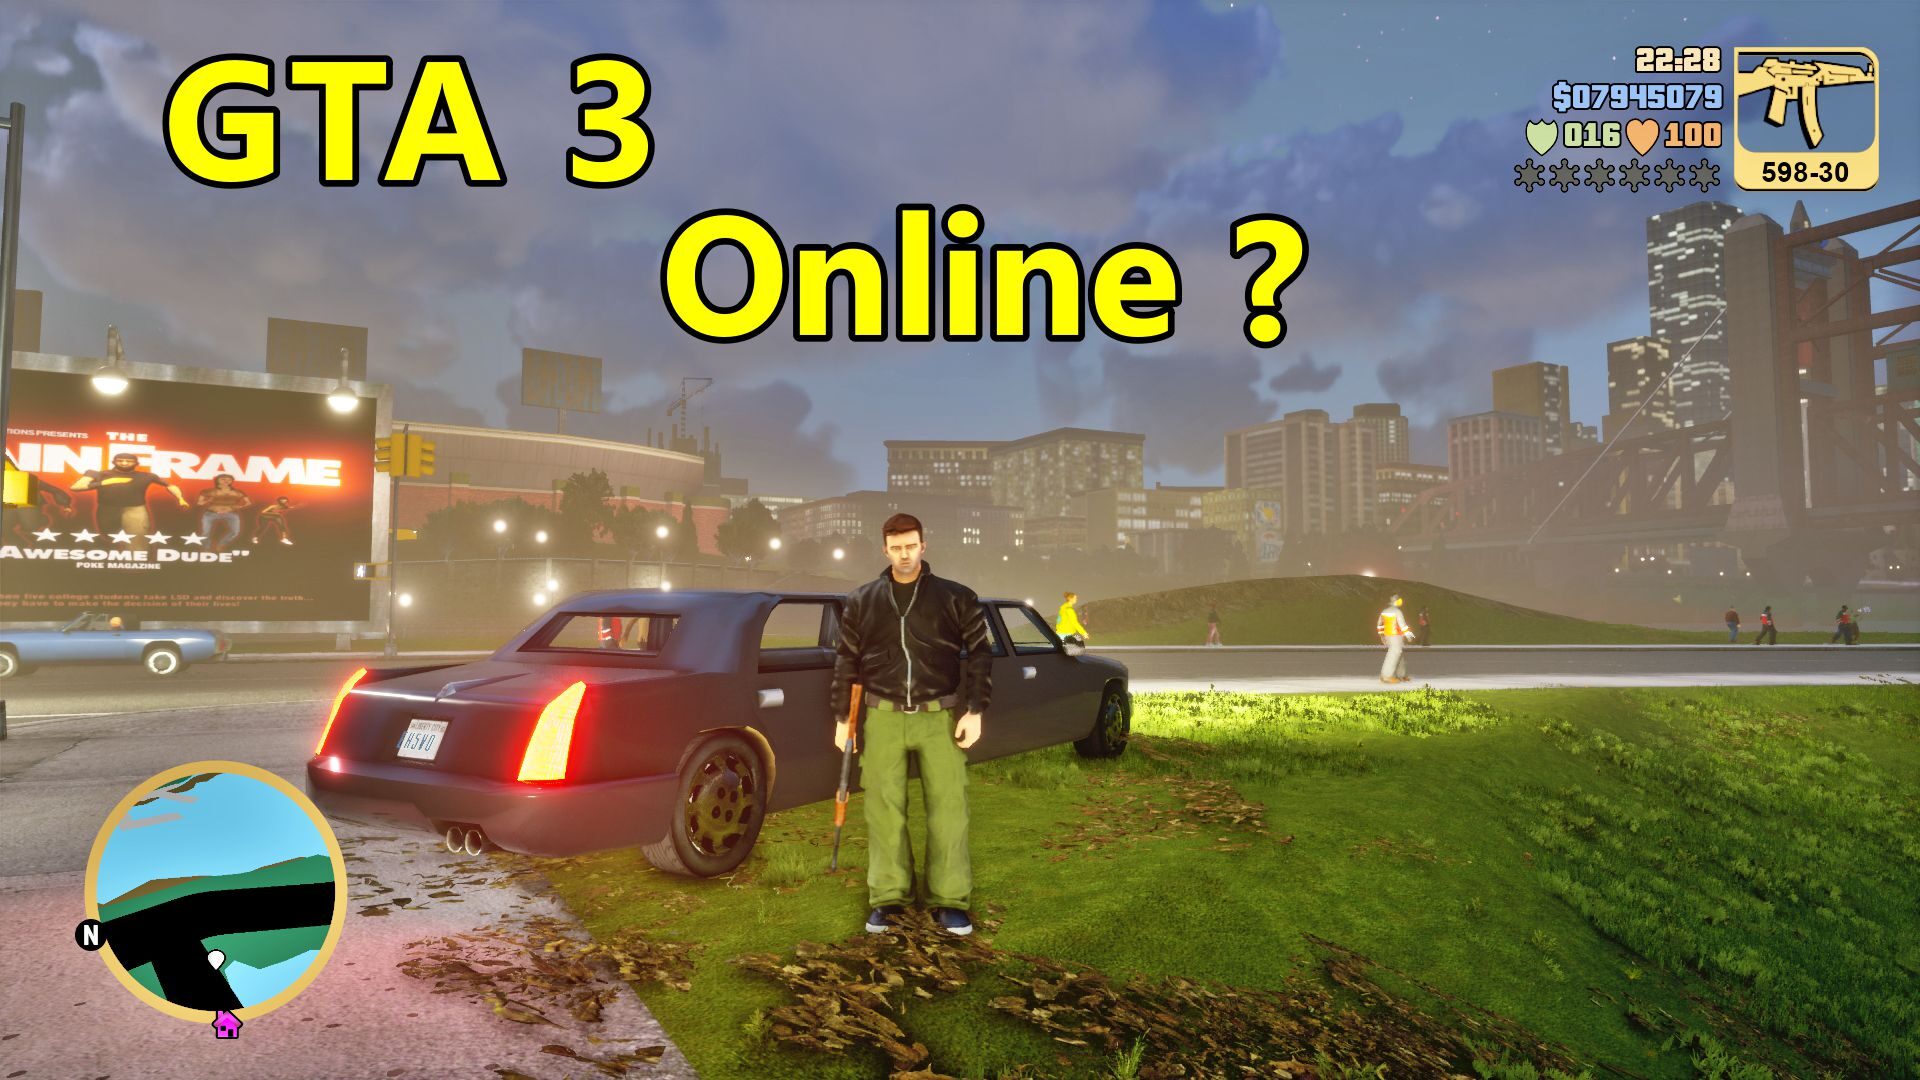 Is there any way to play GTA 3 online